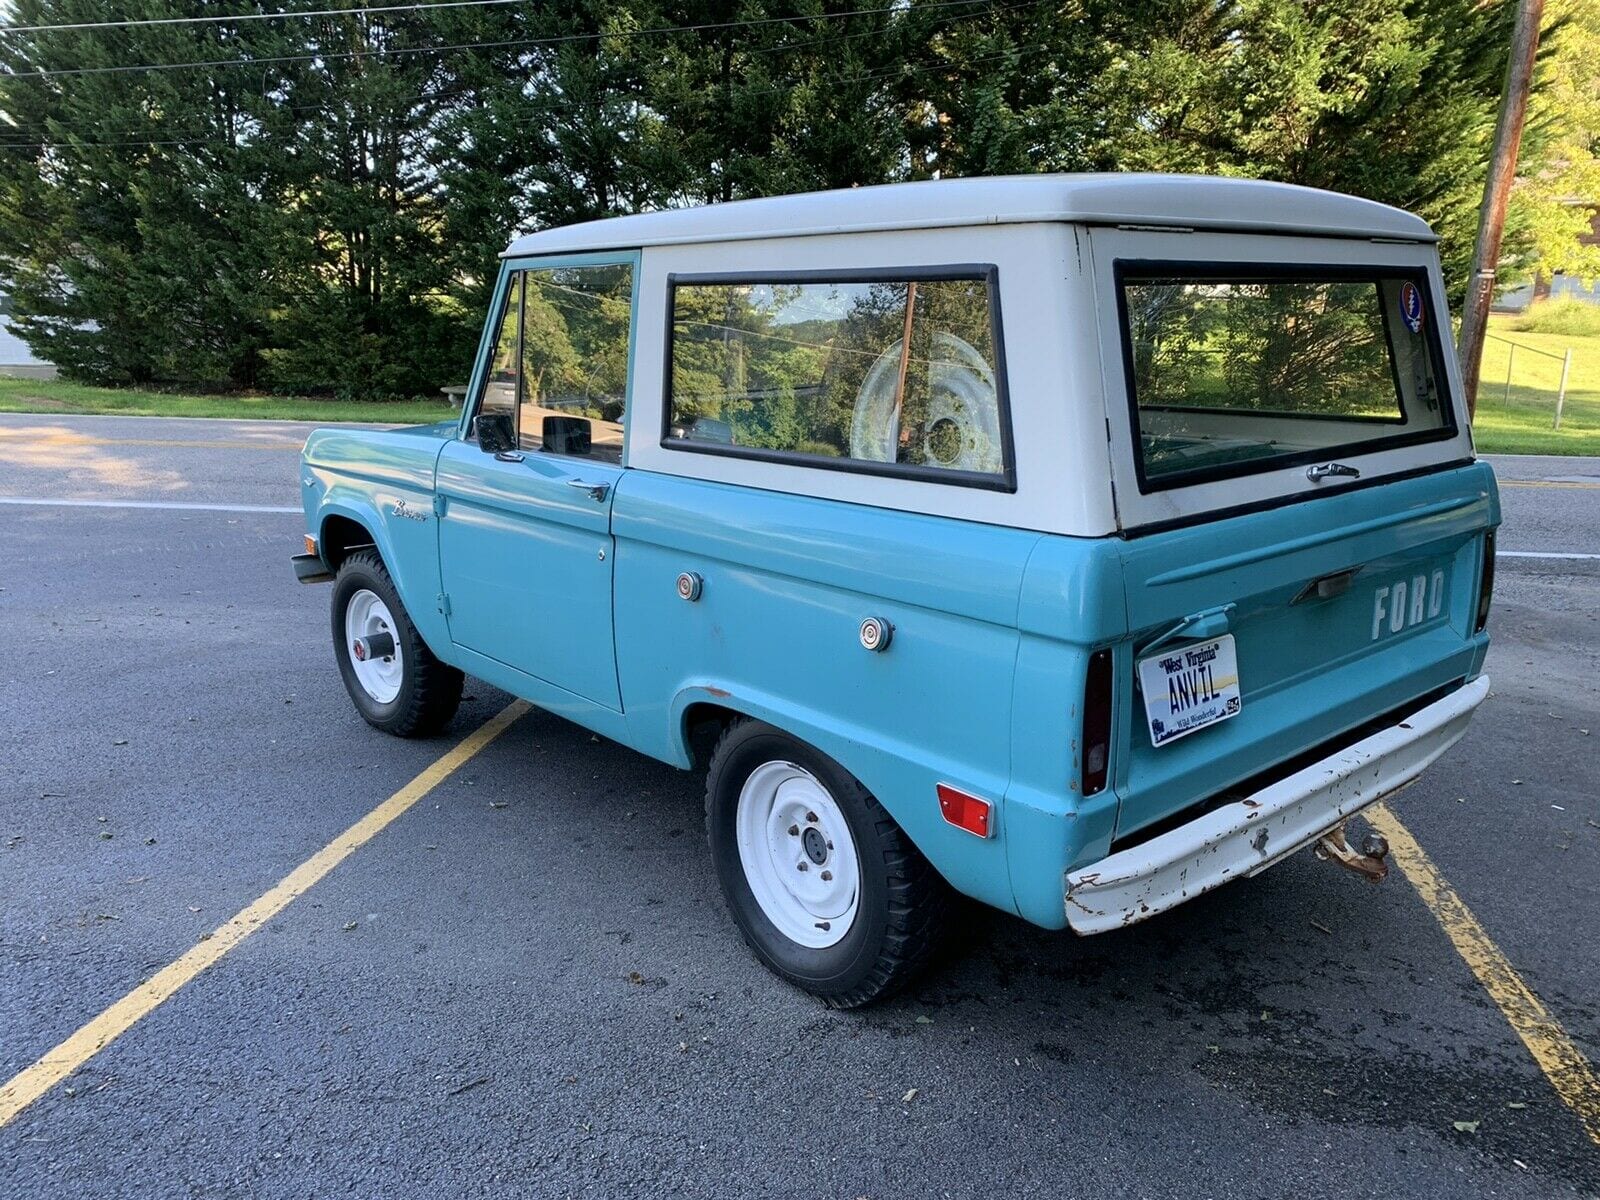 1968 Classic Ford Bronco sitting in a parking lot